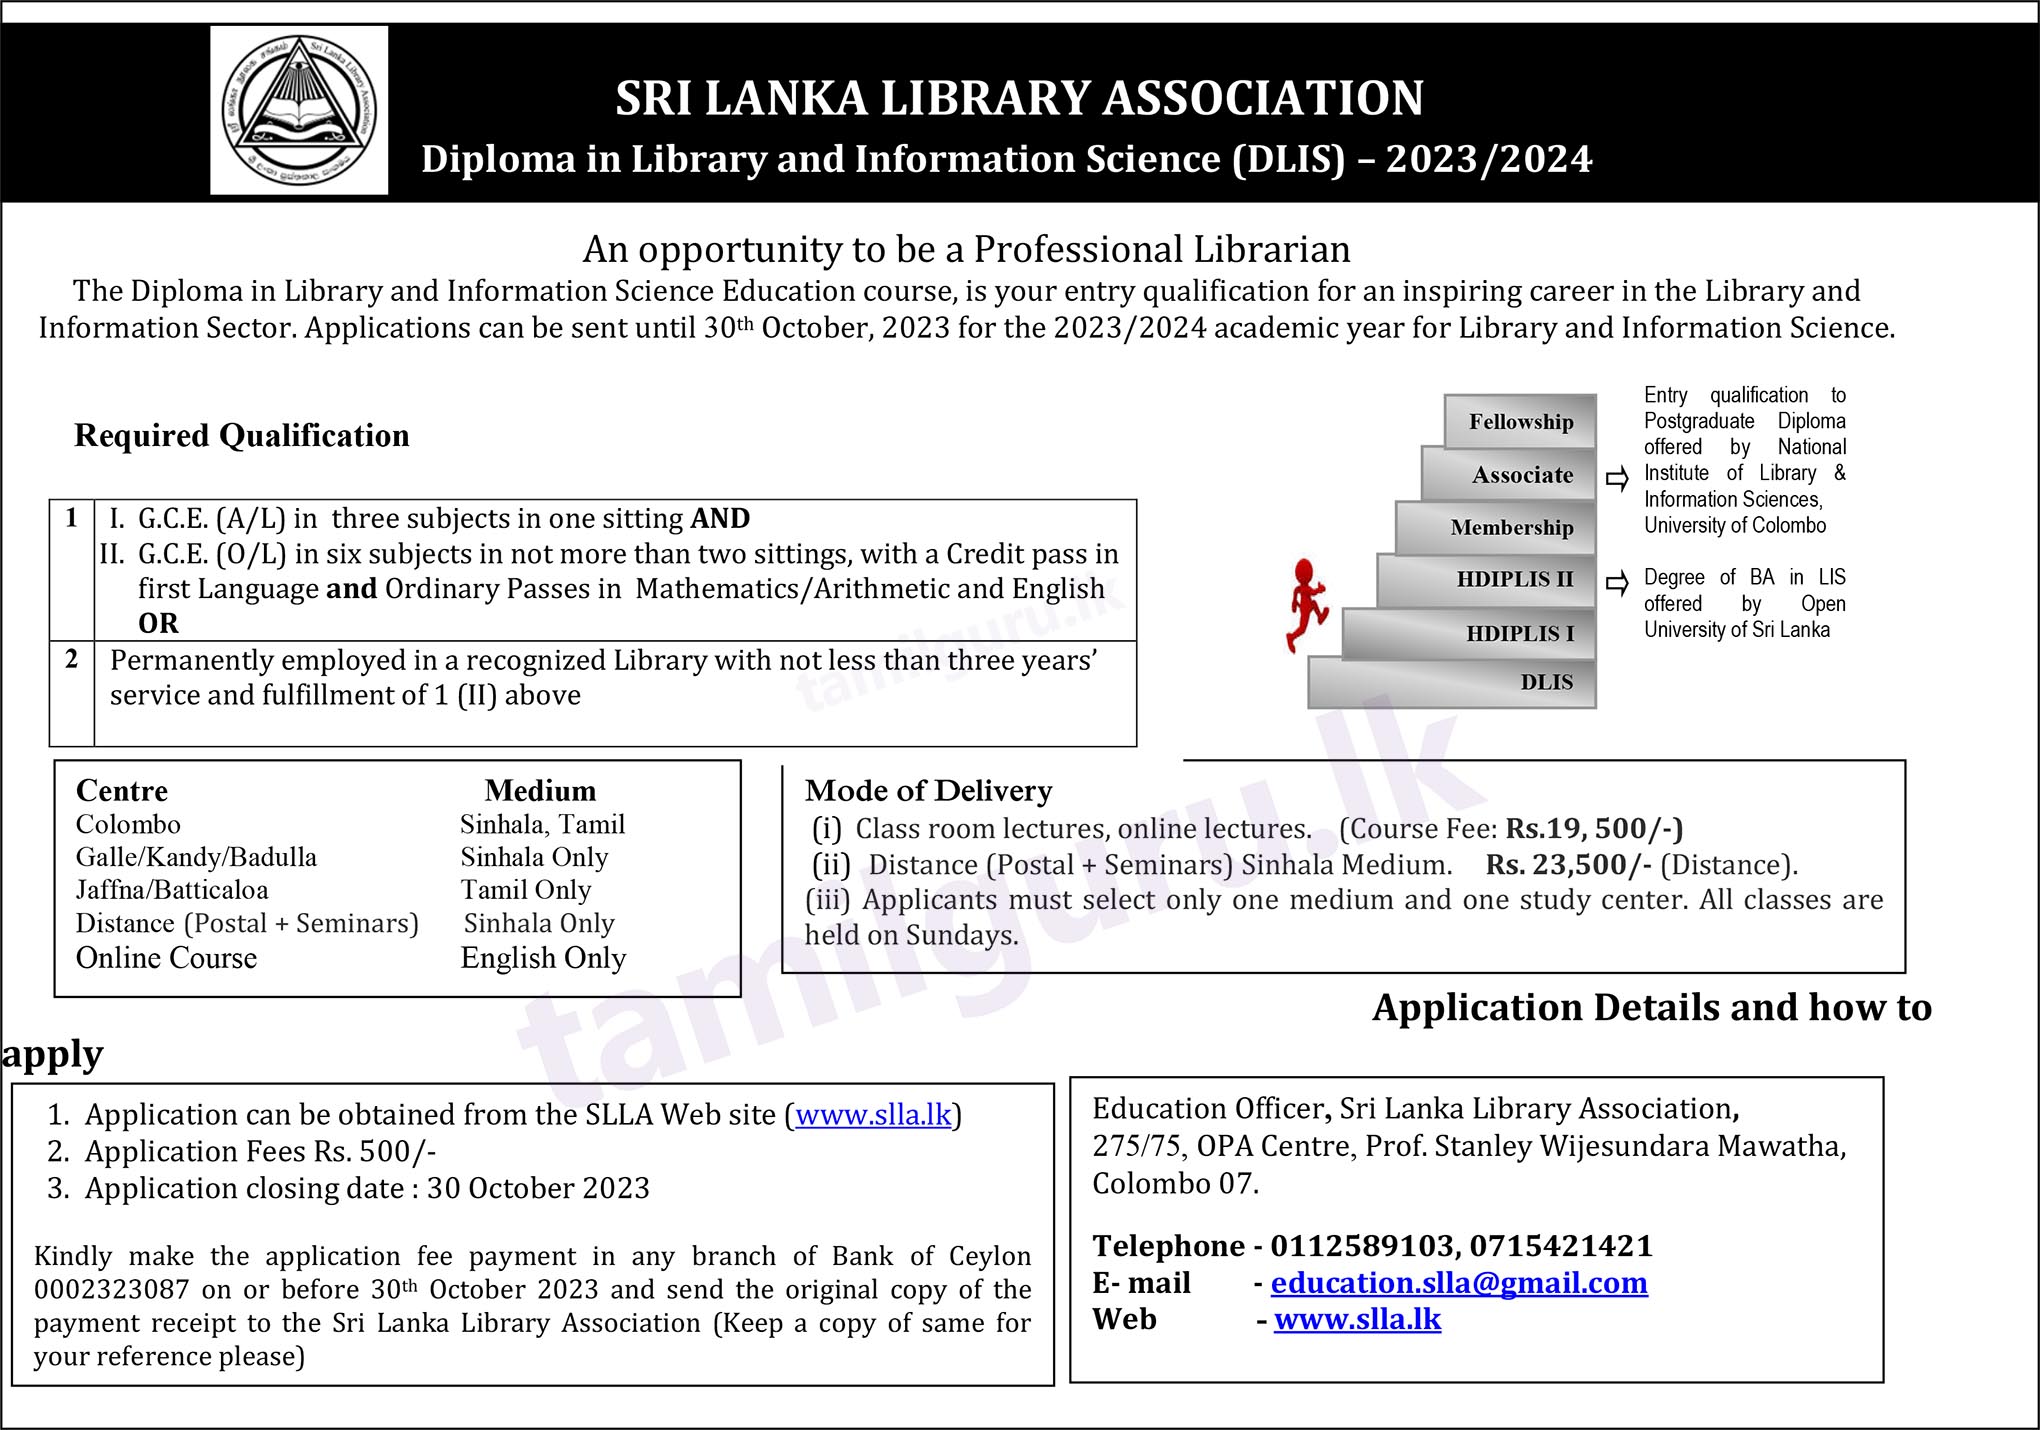 Diploma in Library and Information Science (DLIS) Course 2023 - Sri Lanka Library Association (SLLA)